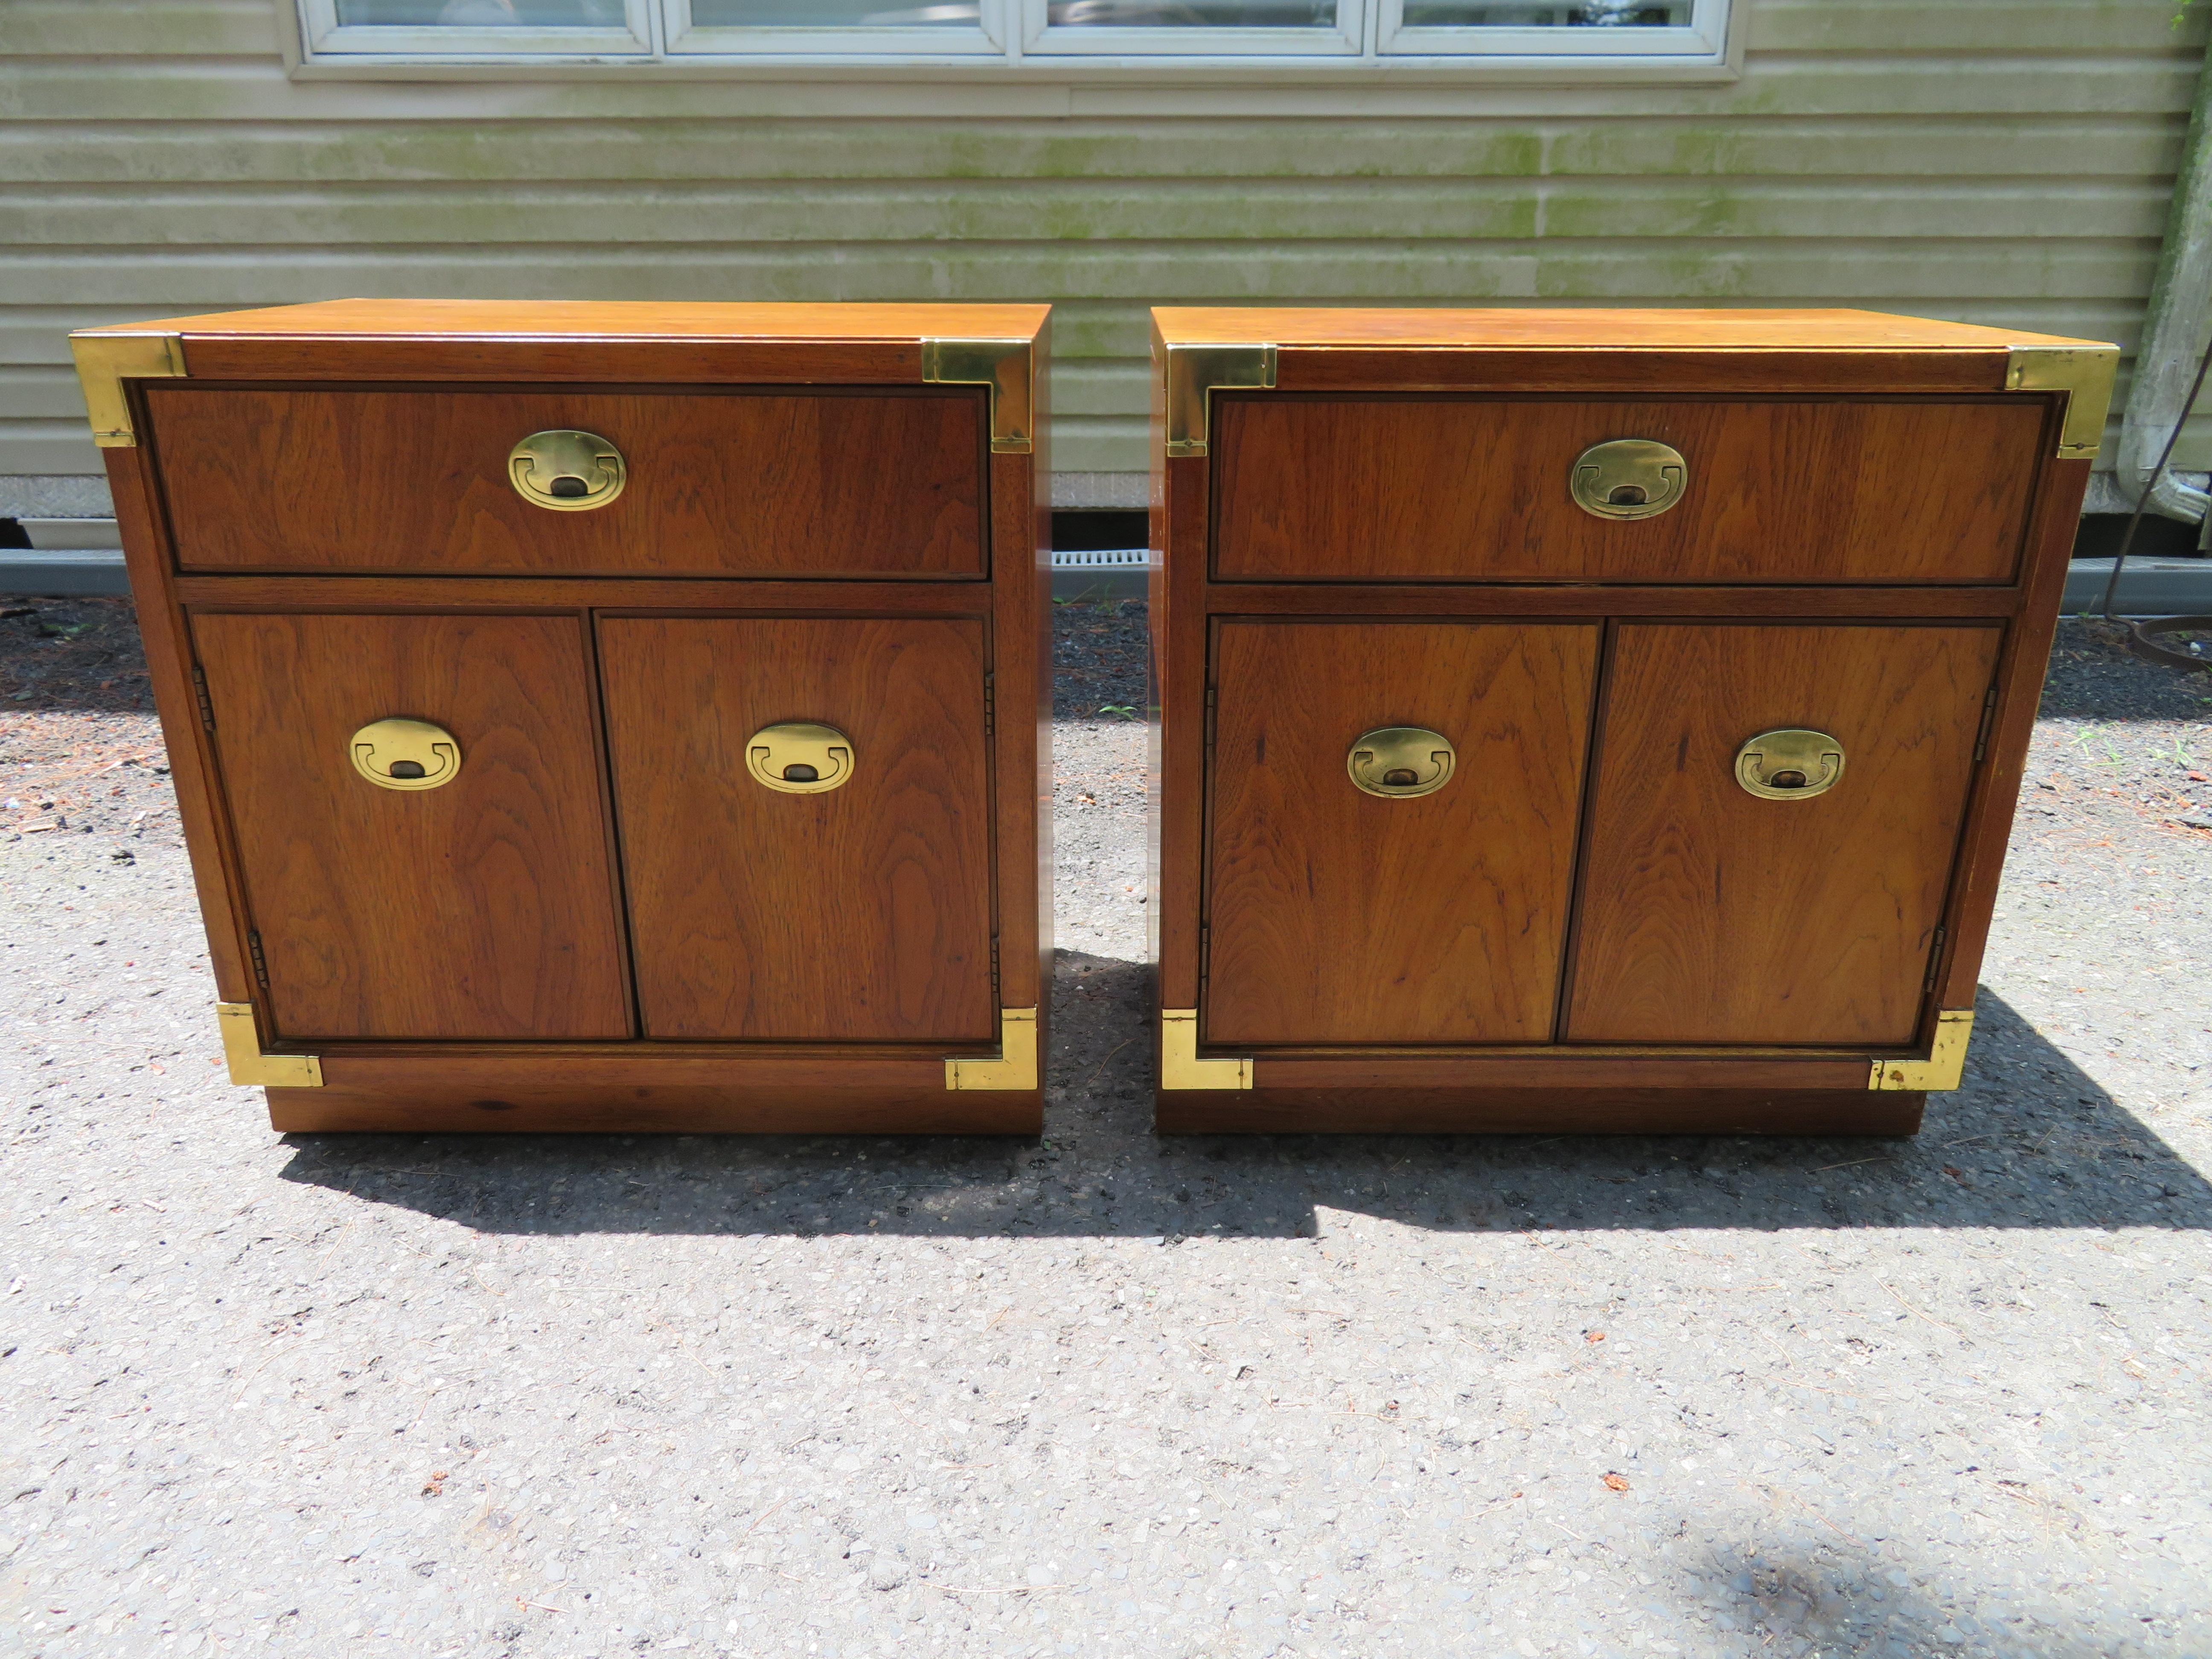 Handsome pair of Thomasville Passport campaign style night stands with their matching queen size headboard. Solid, heavy, high quality wood and very well crafted. Dovetail drawers glide well. Clean lines. Beautiful solid brass hardware. Night stands